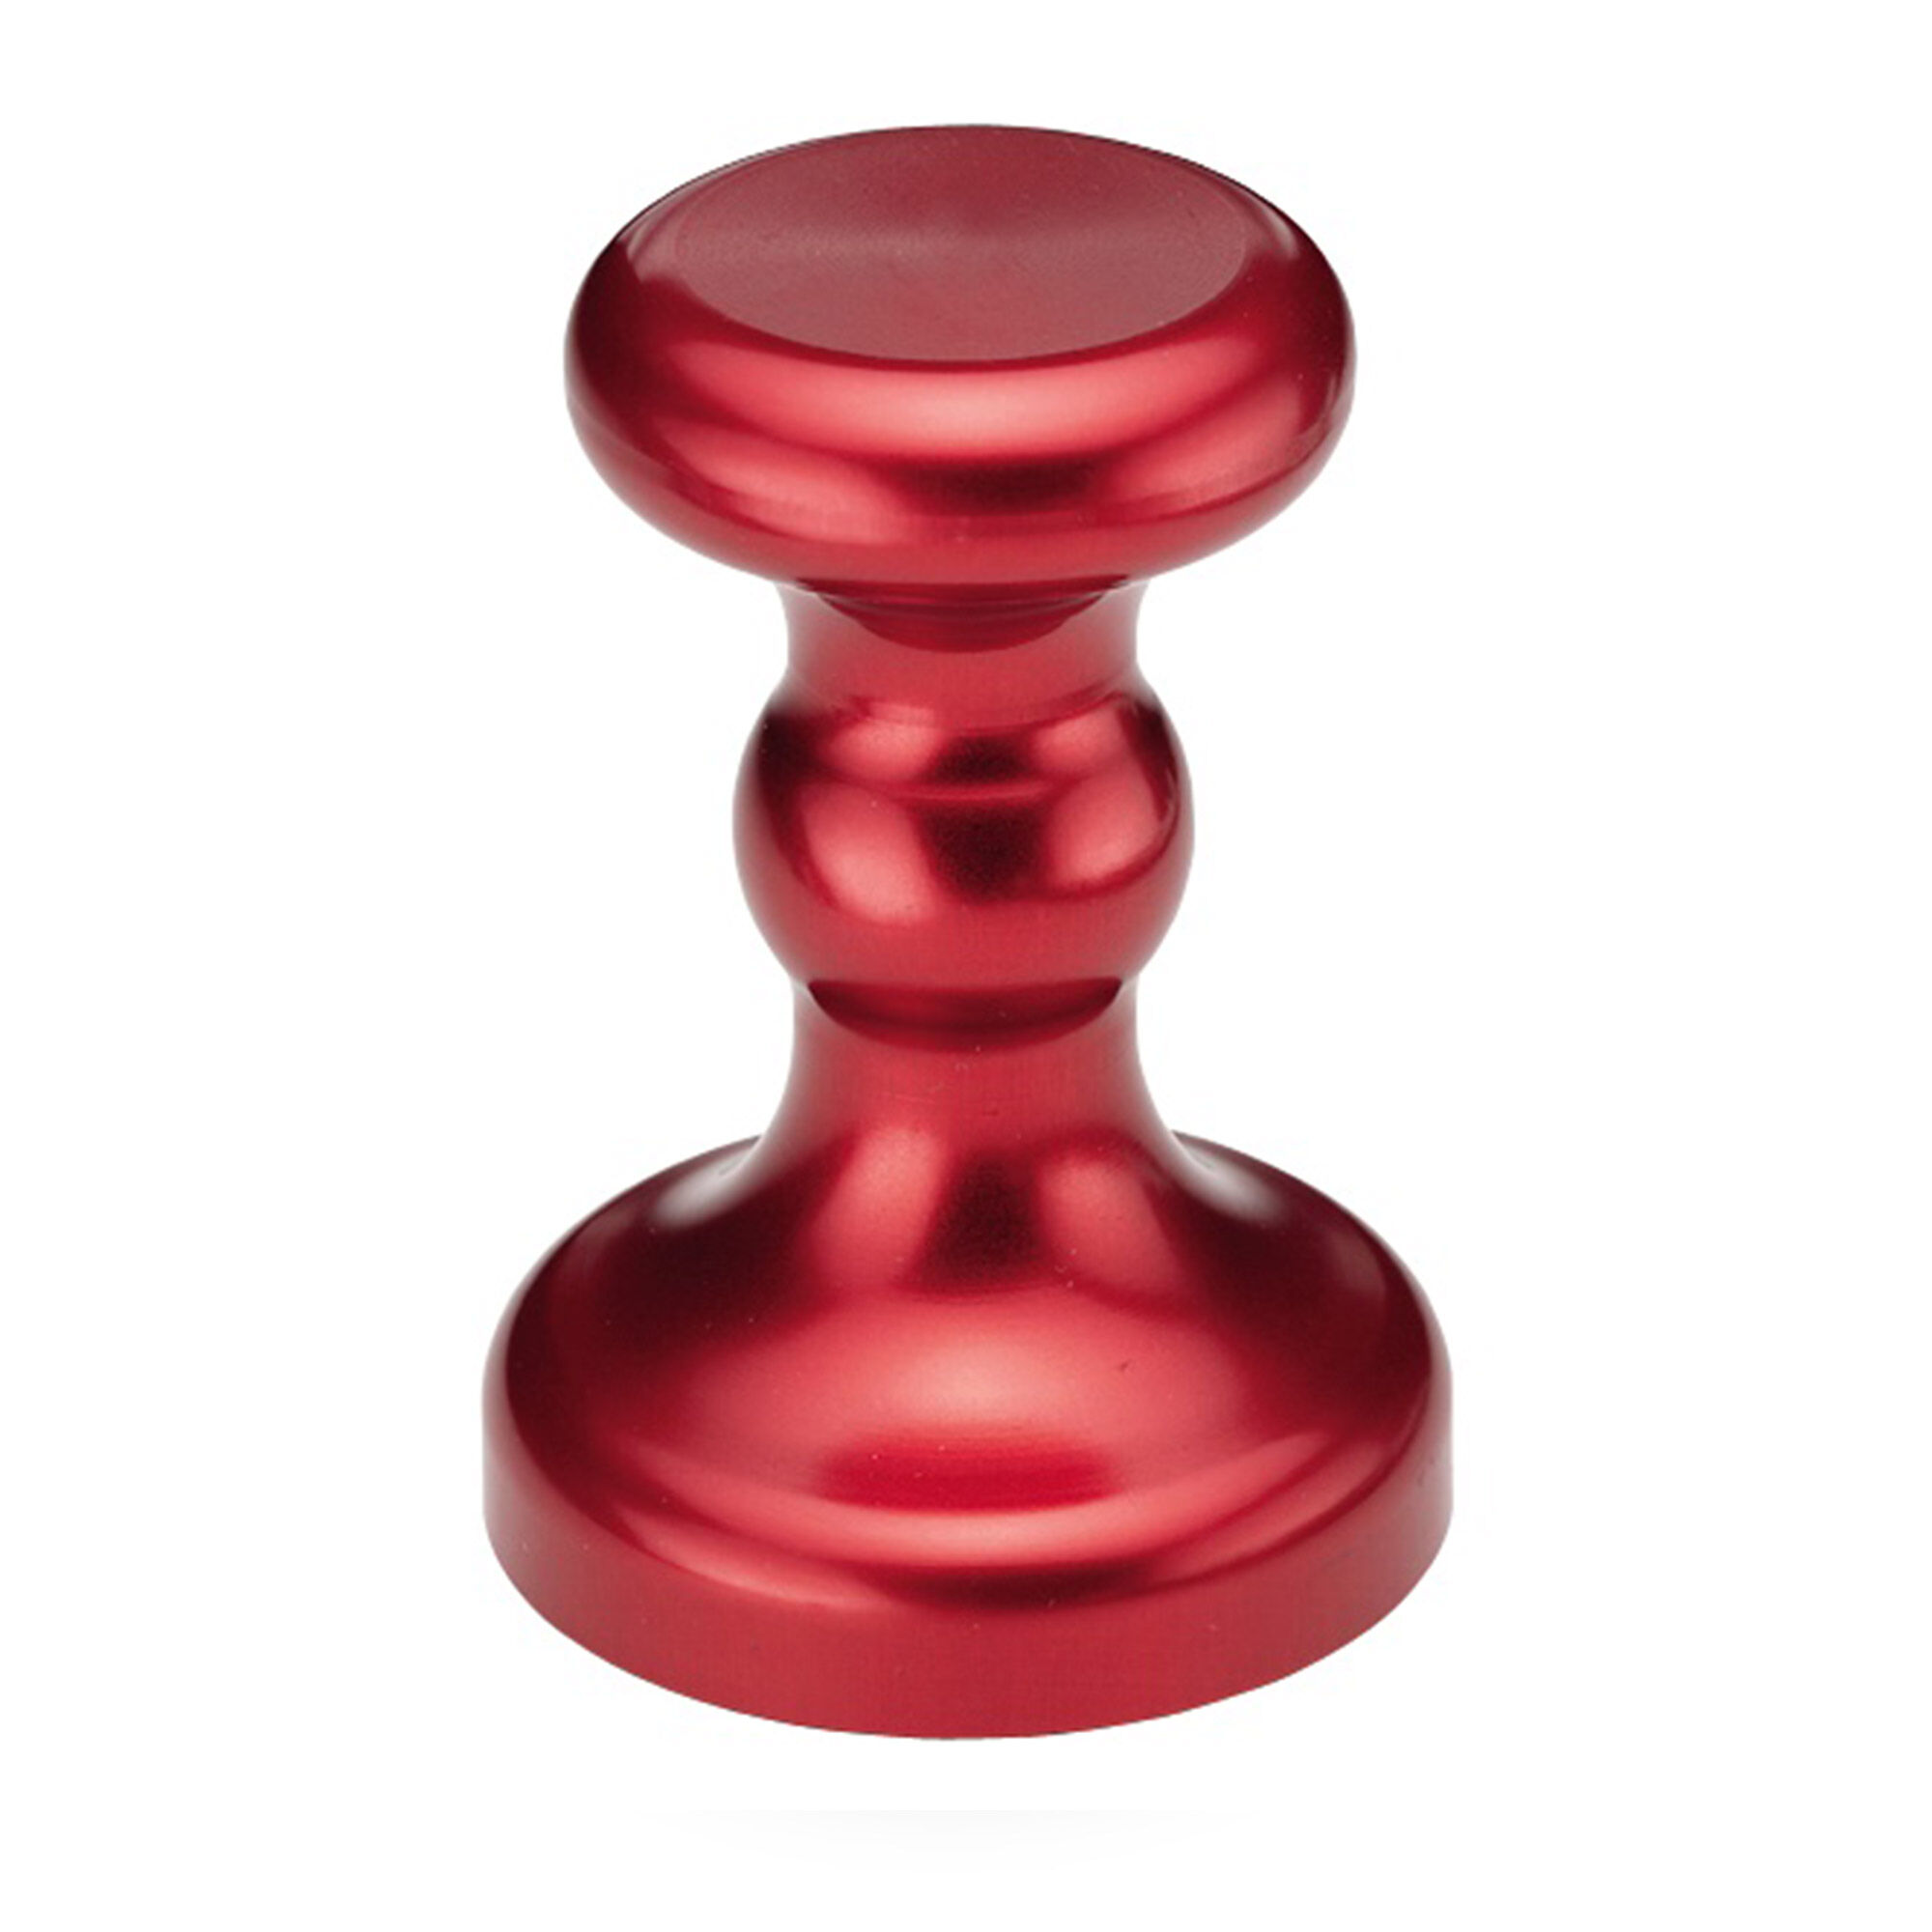 illy 54mm Metal Espresso Tamper - Red